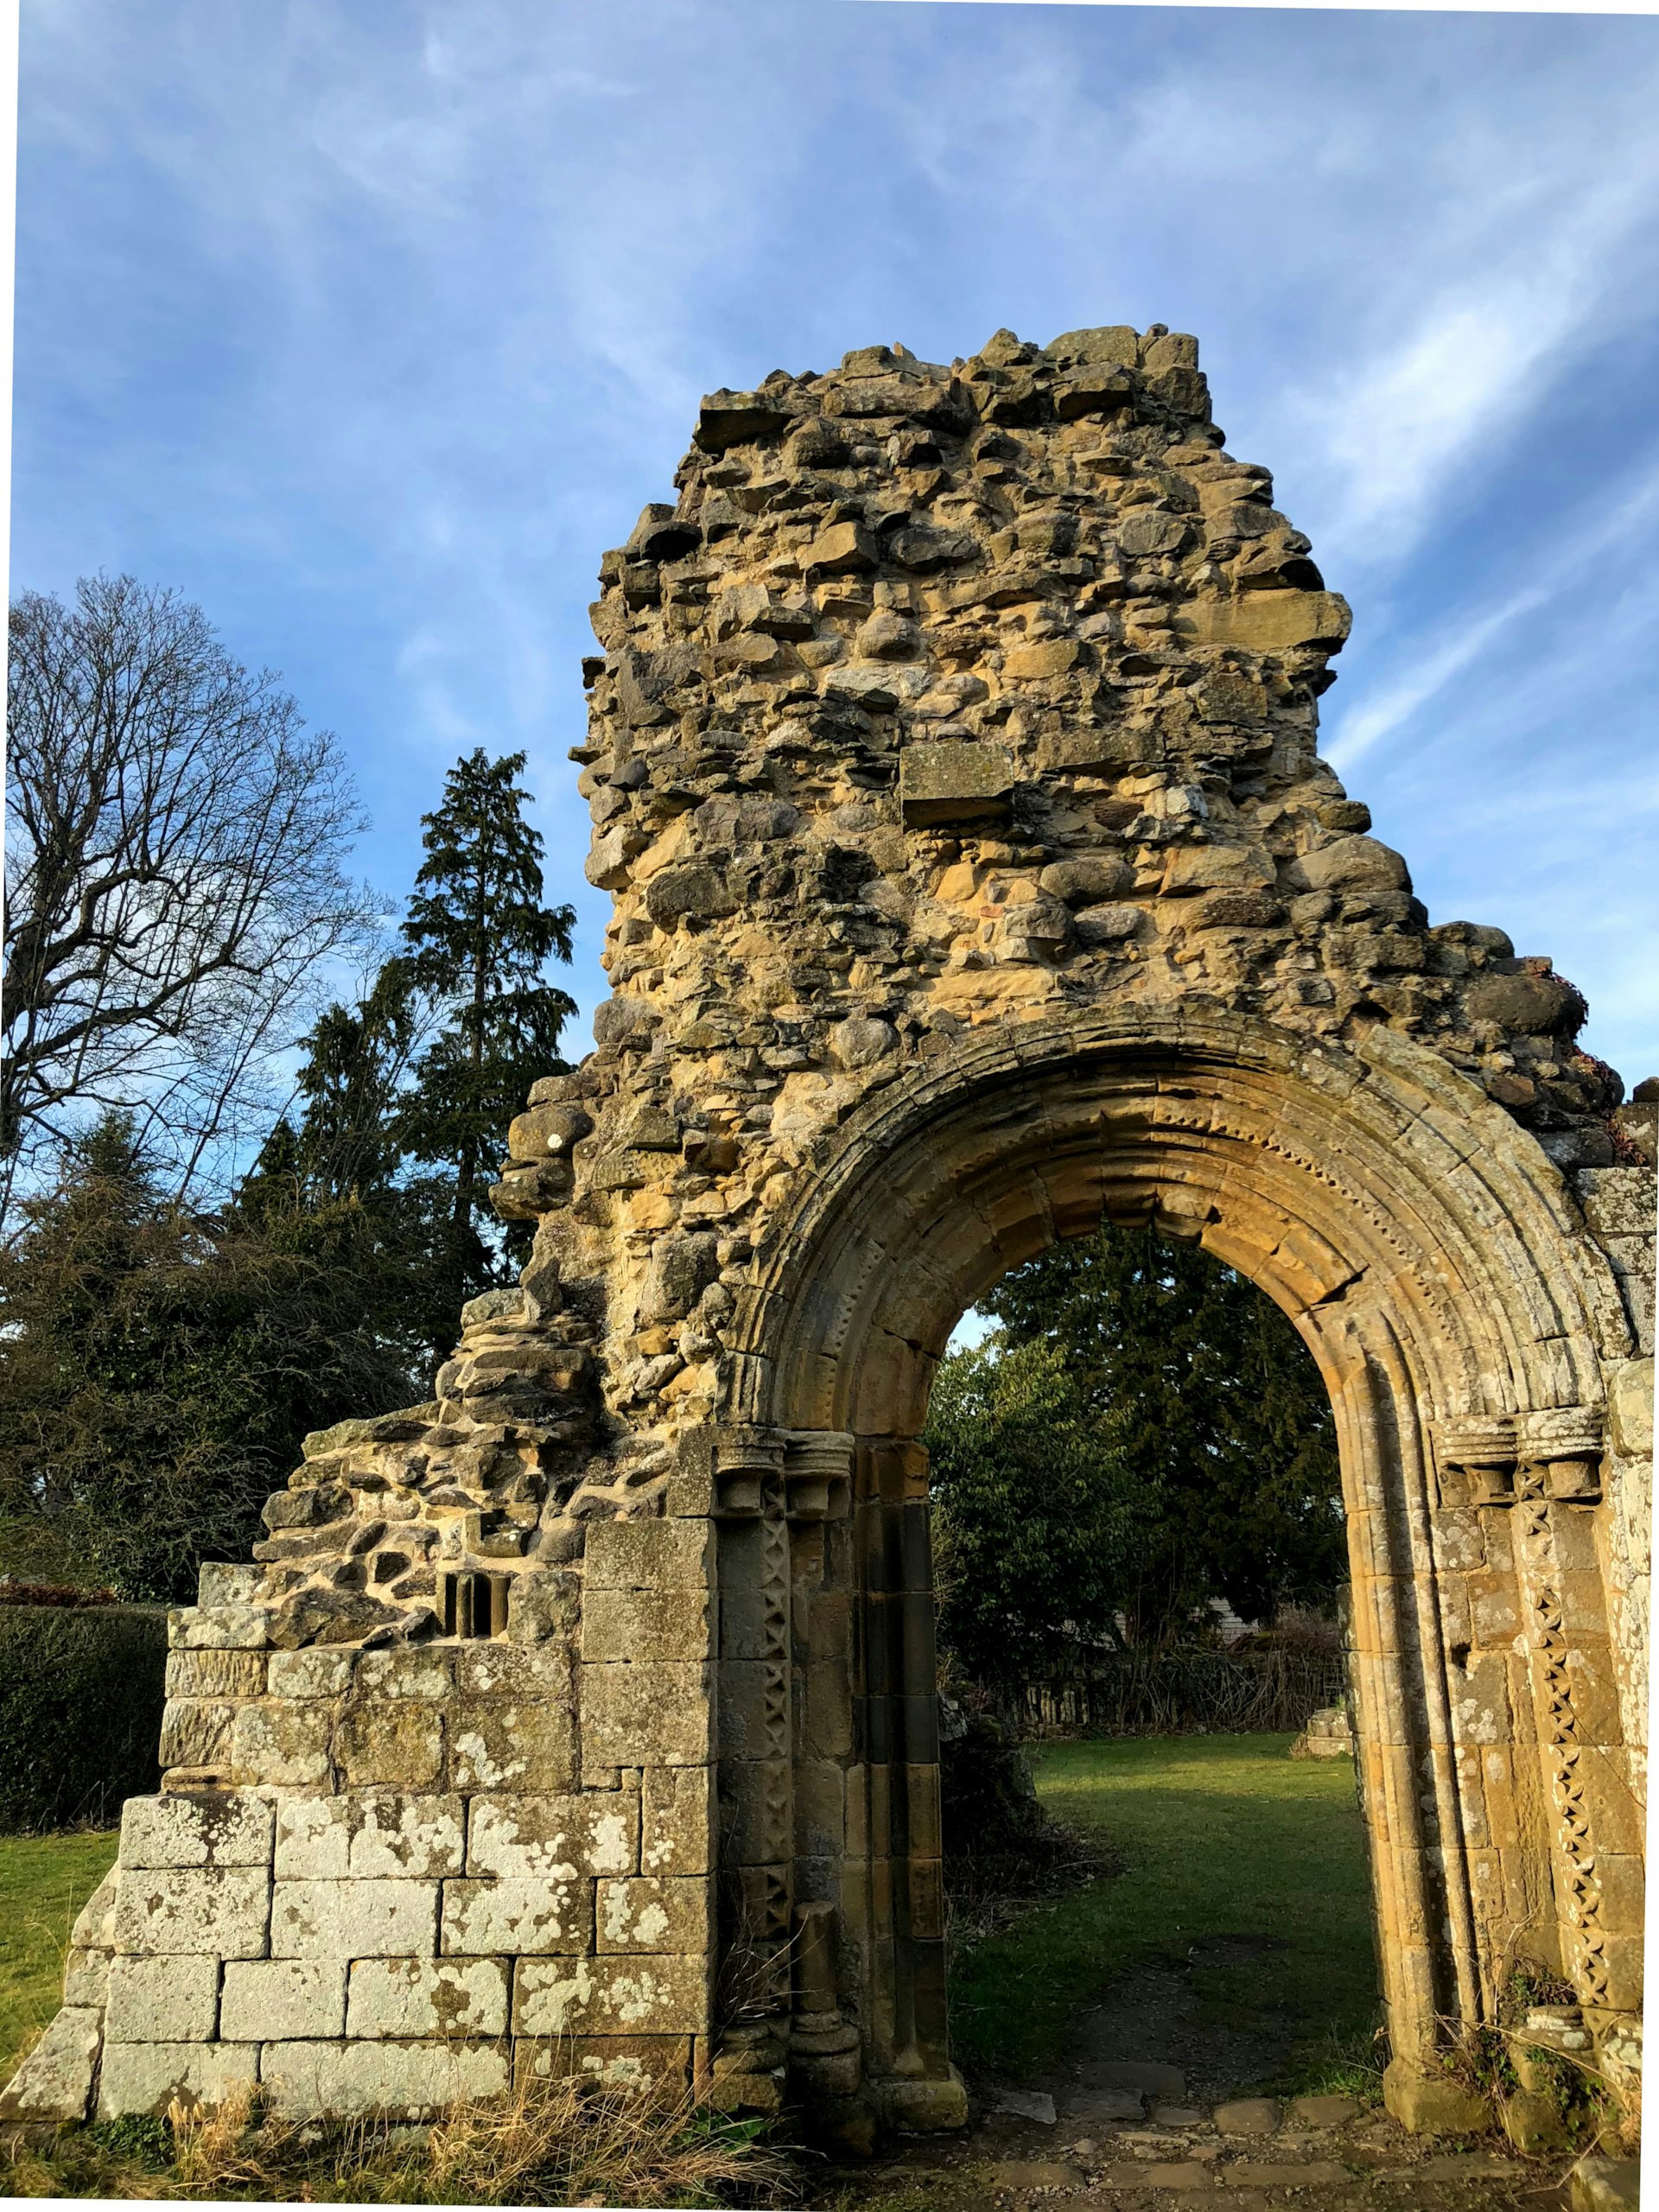 A ruined archway at Jervaulx Abbey